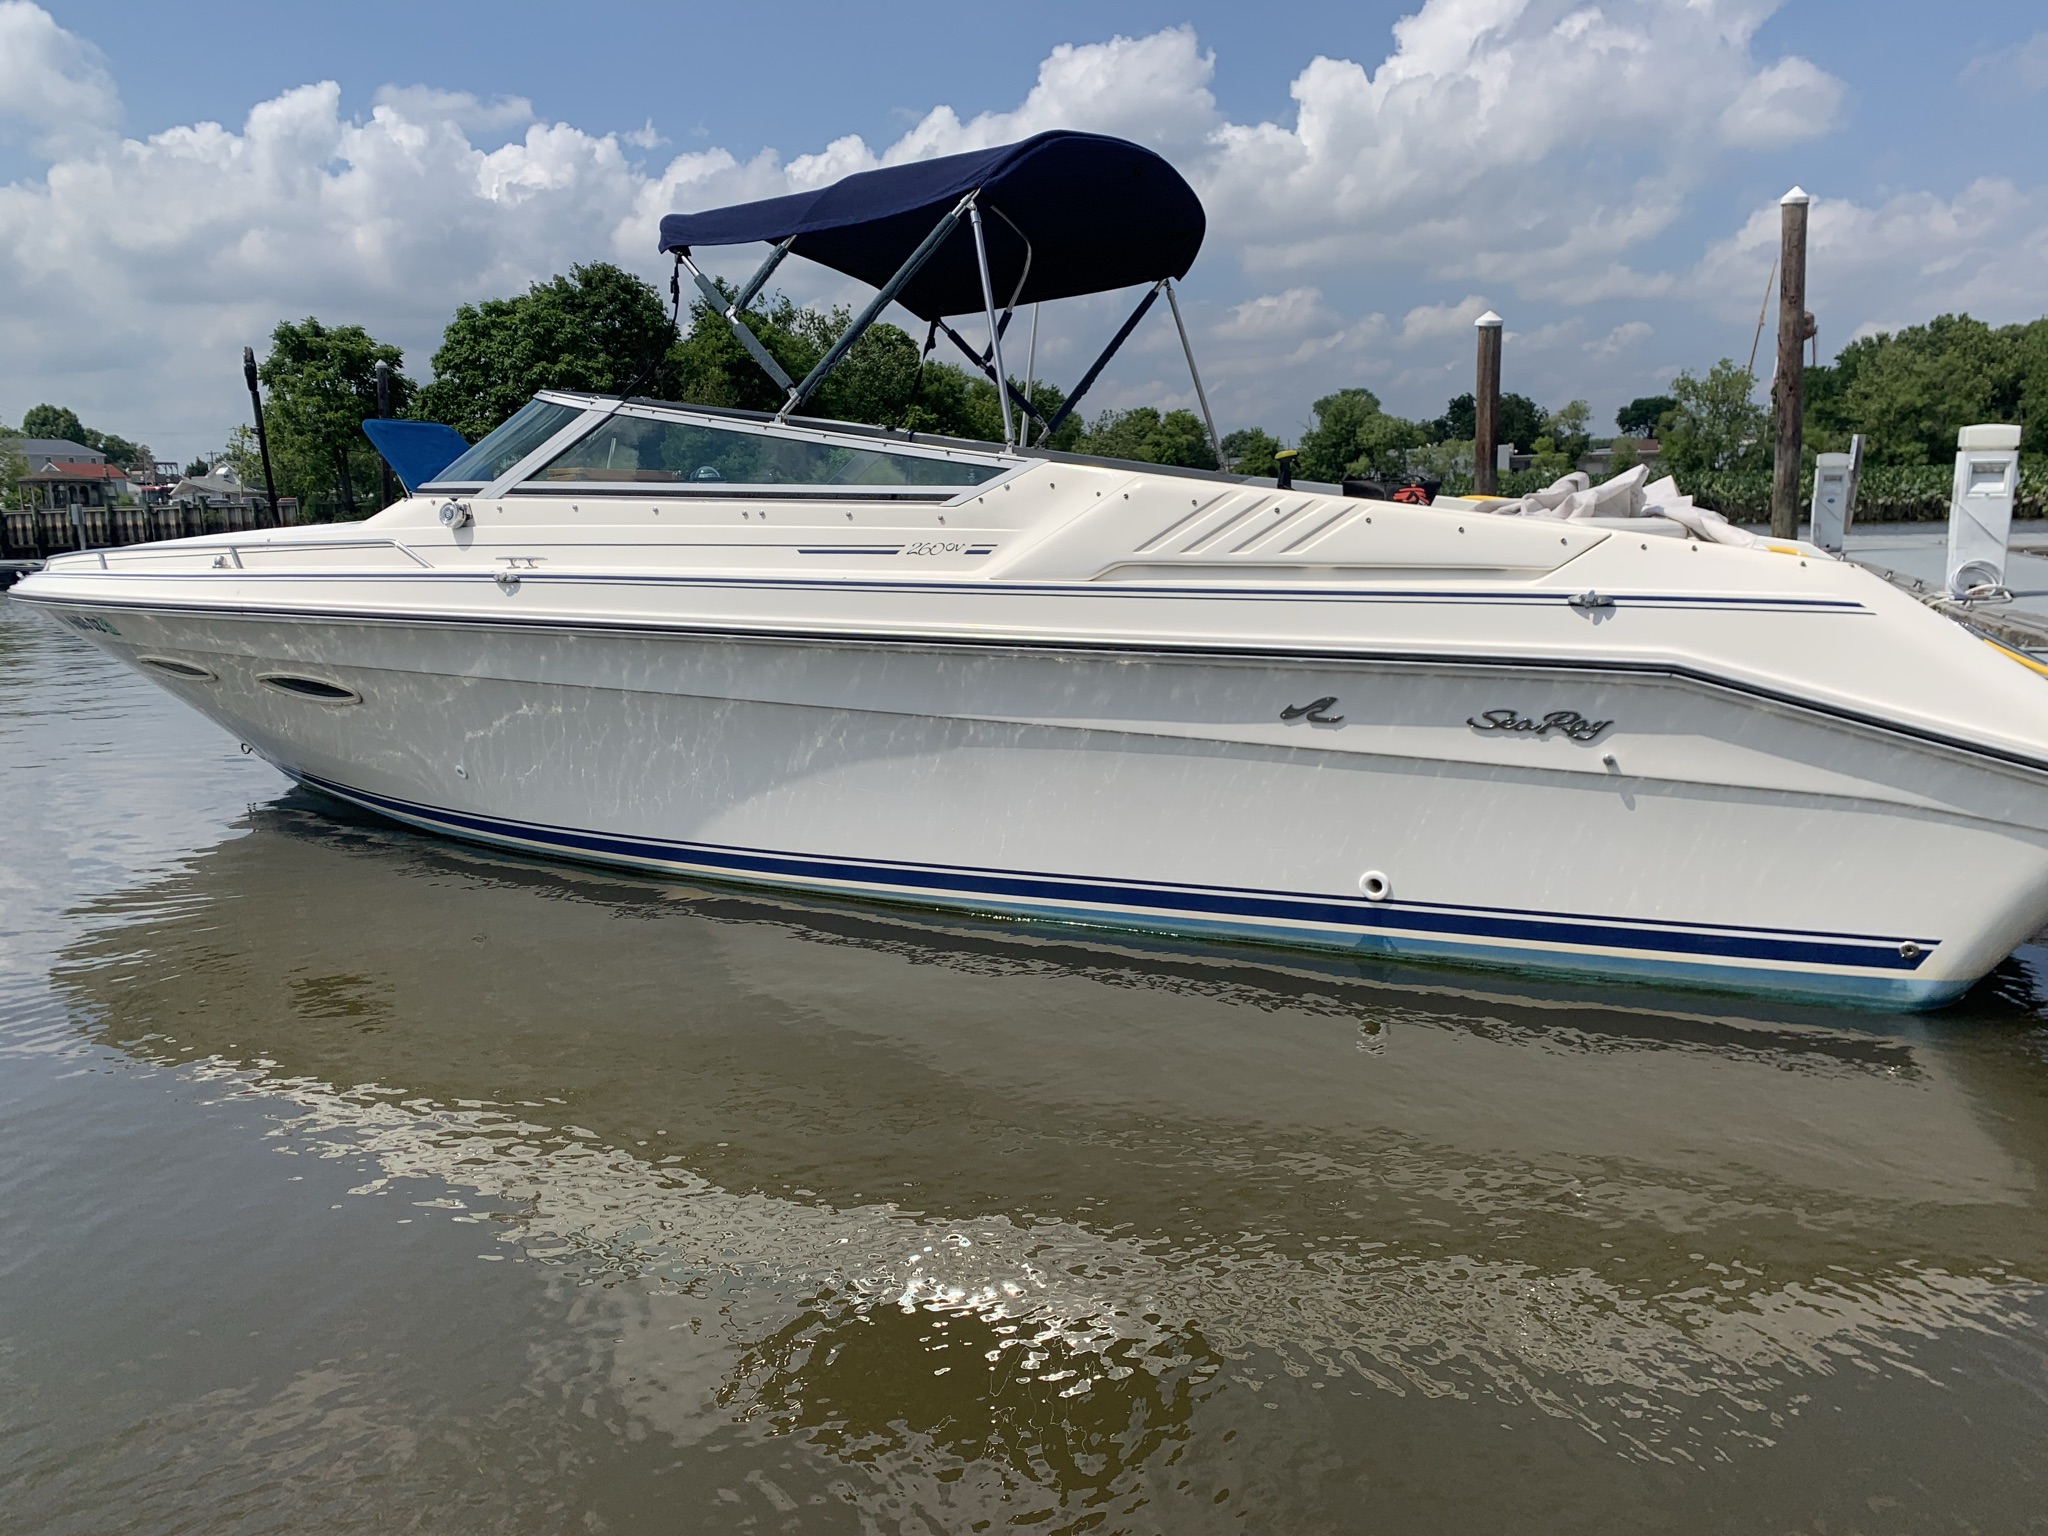 1990 Sea Ray 260 overnighter  Power boat for sale in Rutledge, PA - image 16 